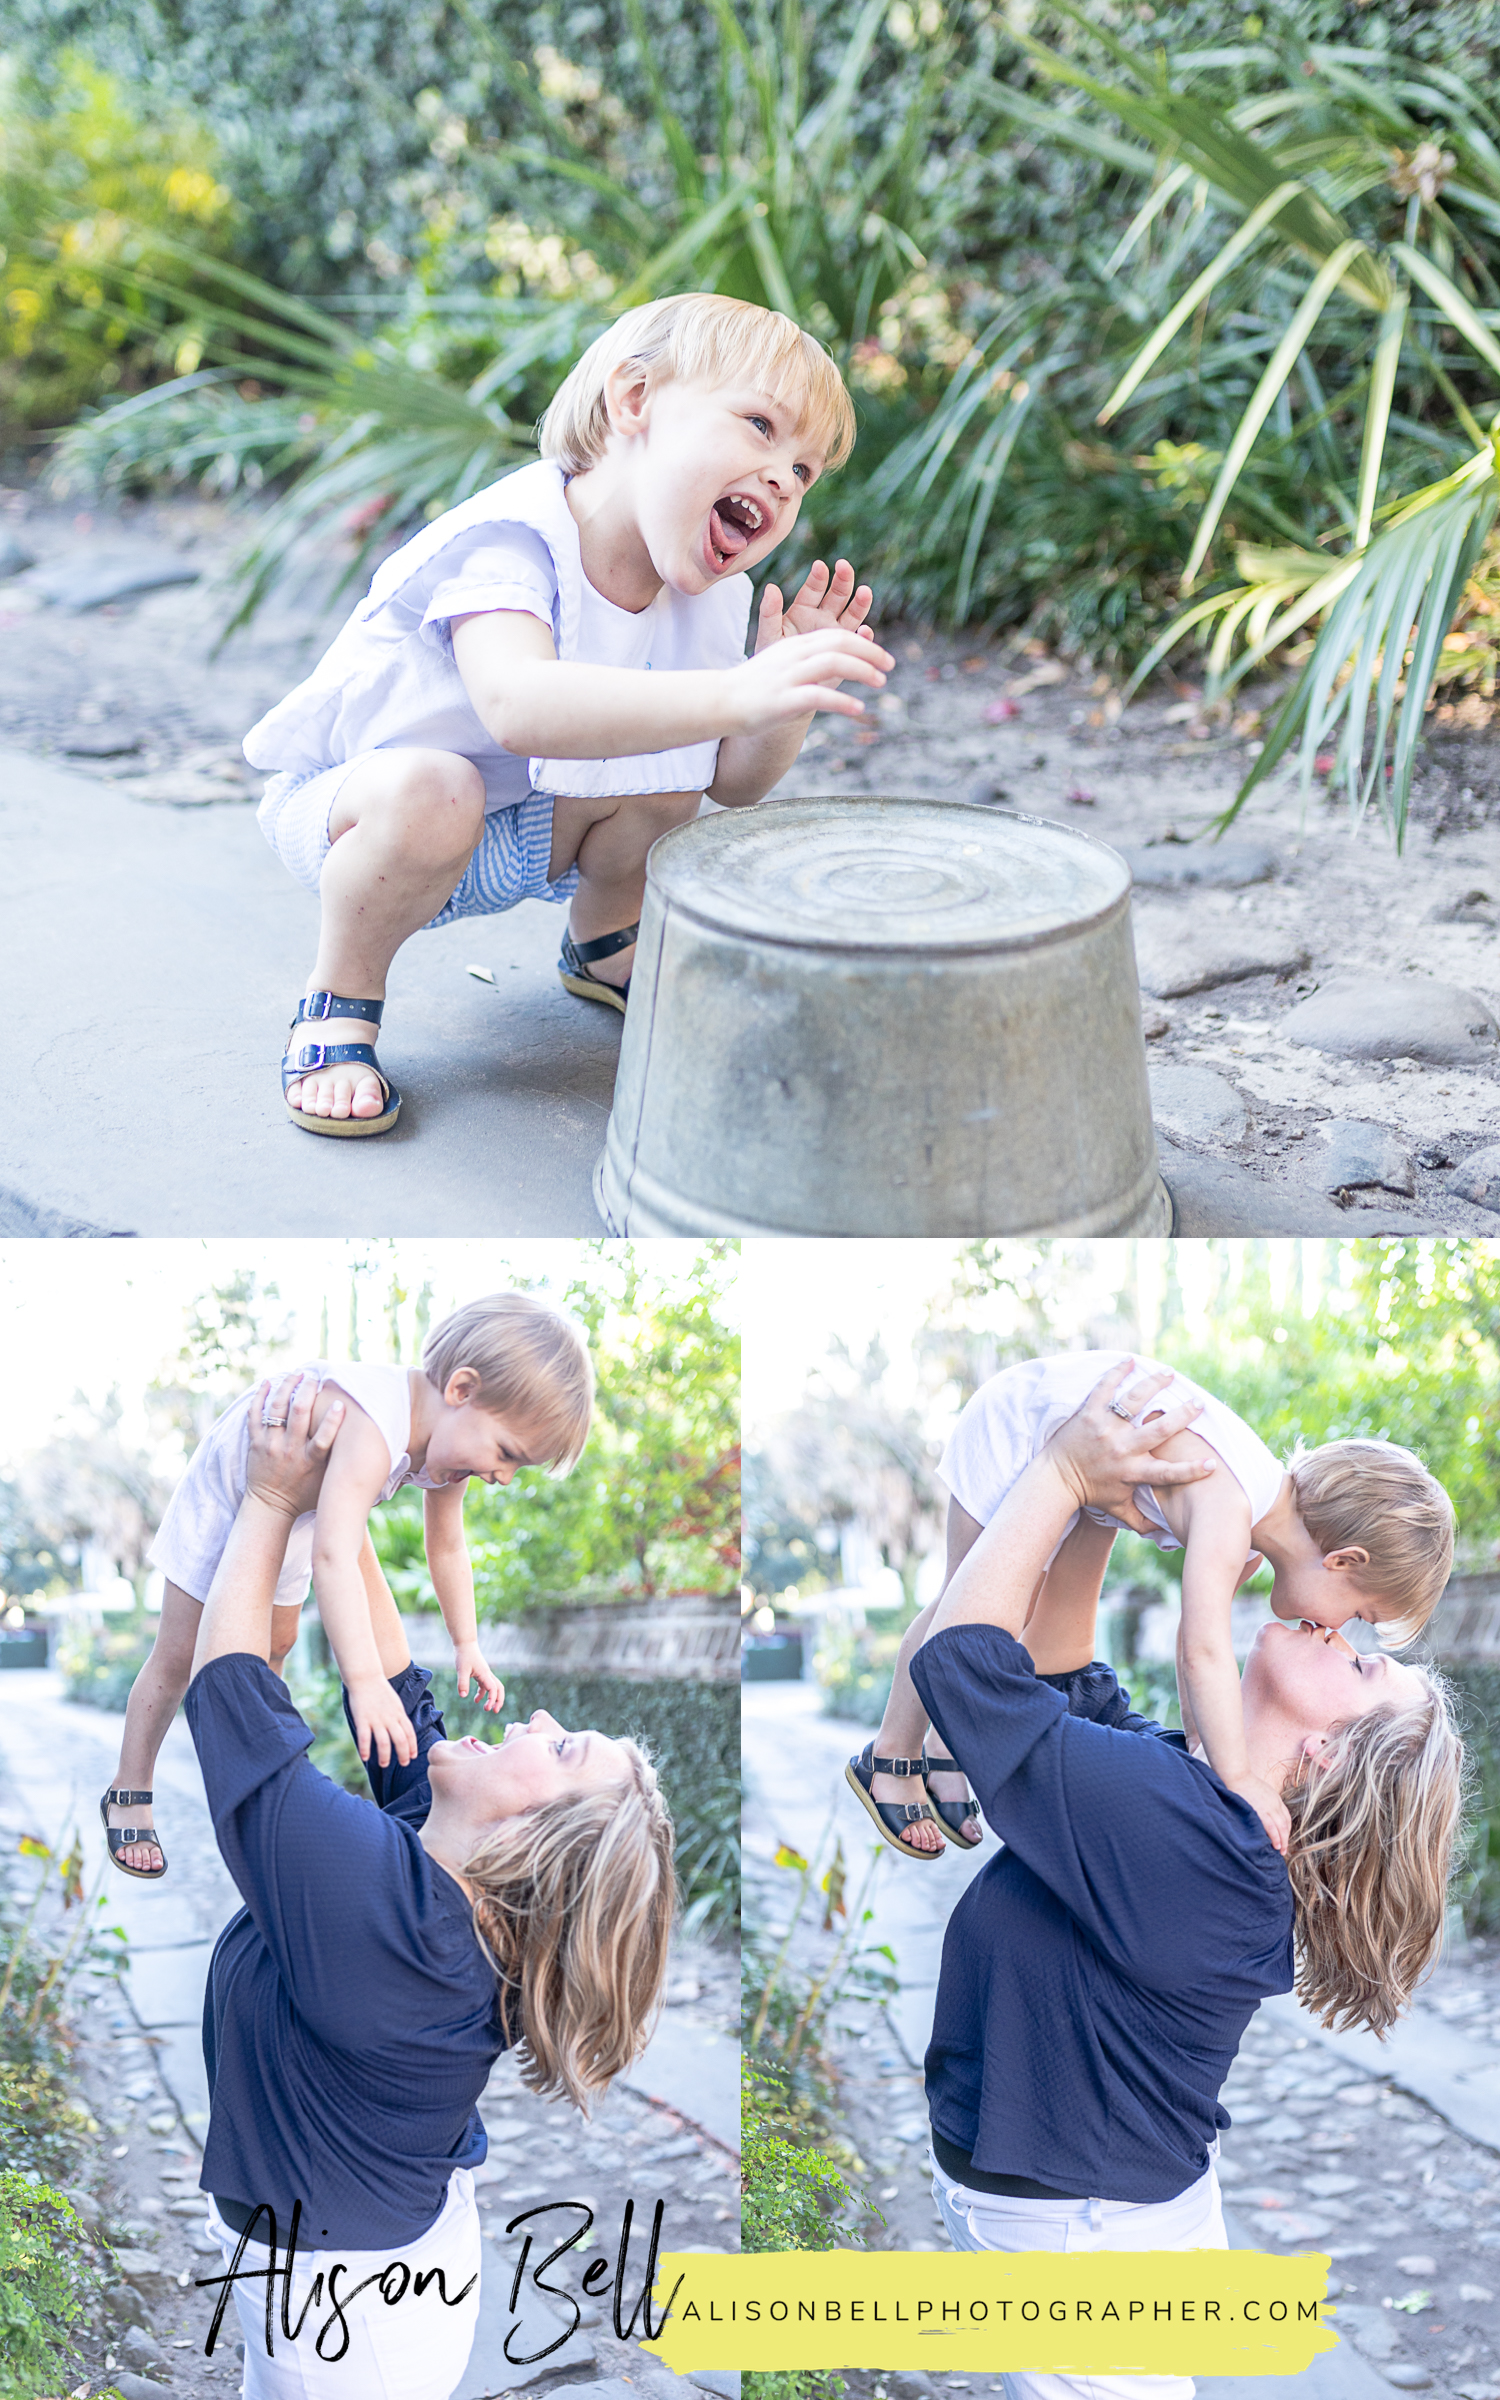 Downtown Charleston mommy & me mini photo sessions by alison bell photographer